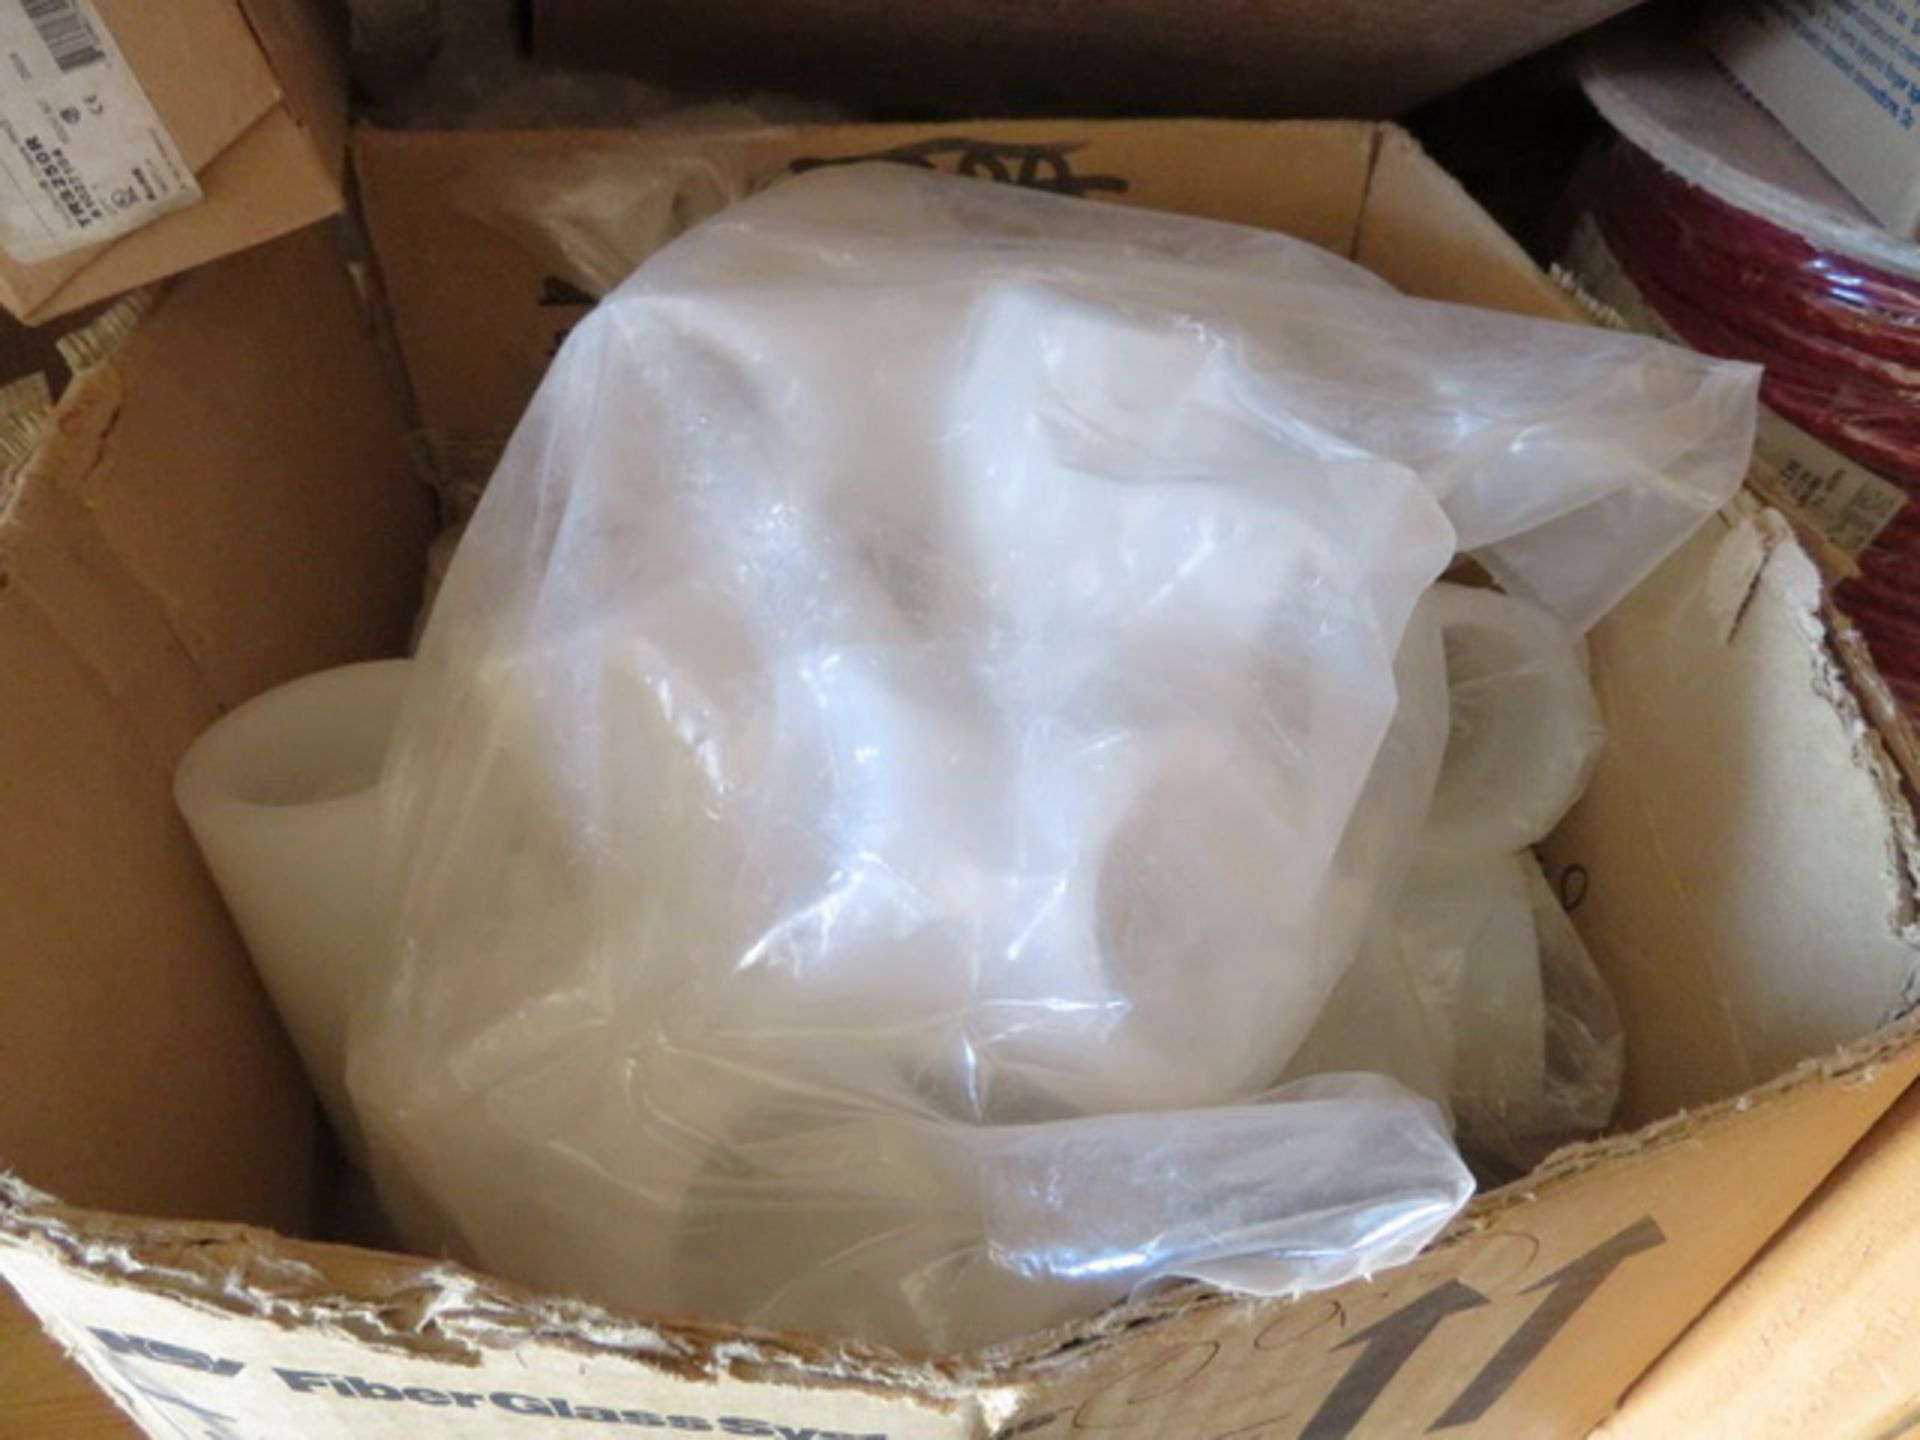 Remaining Contents of Shipping Container. To Include PVC Pipe Fittings, PVC Ball Valves CWC 3/8" - Image 56 of 61